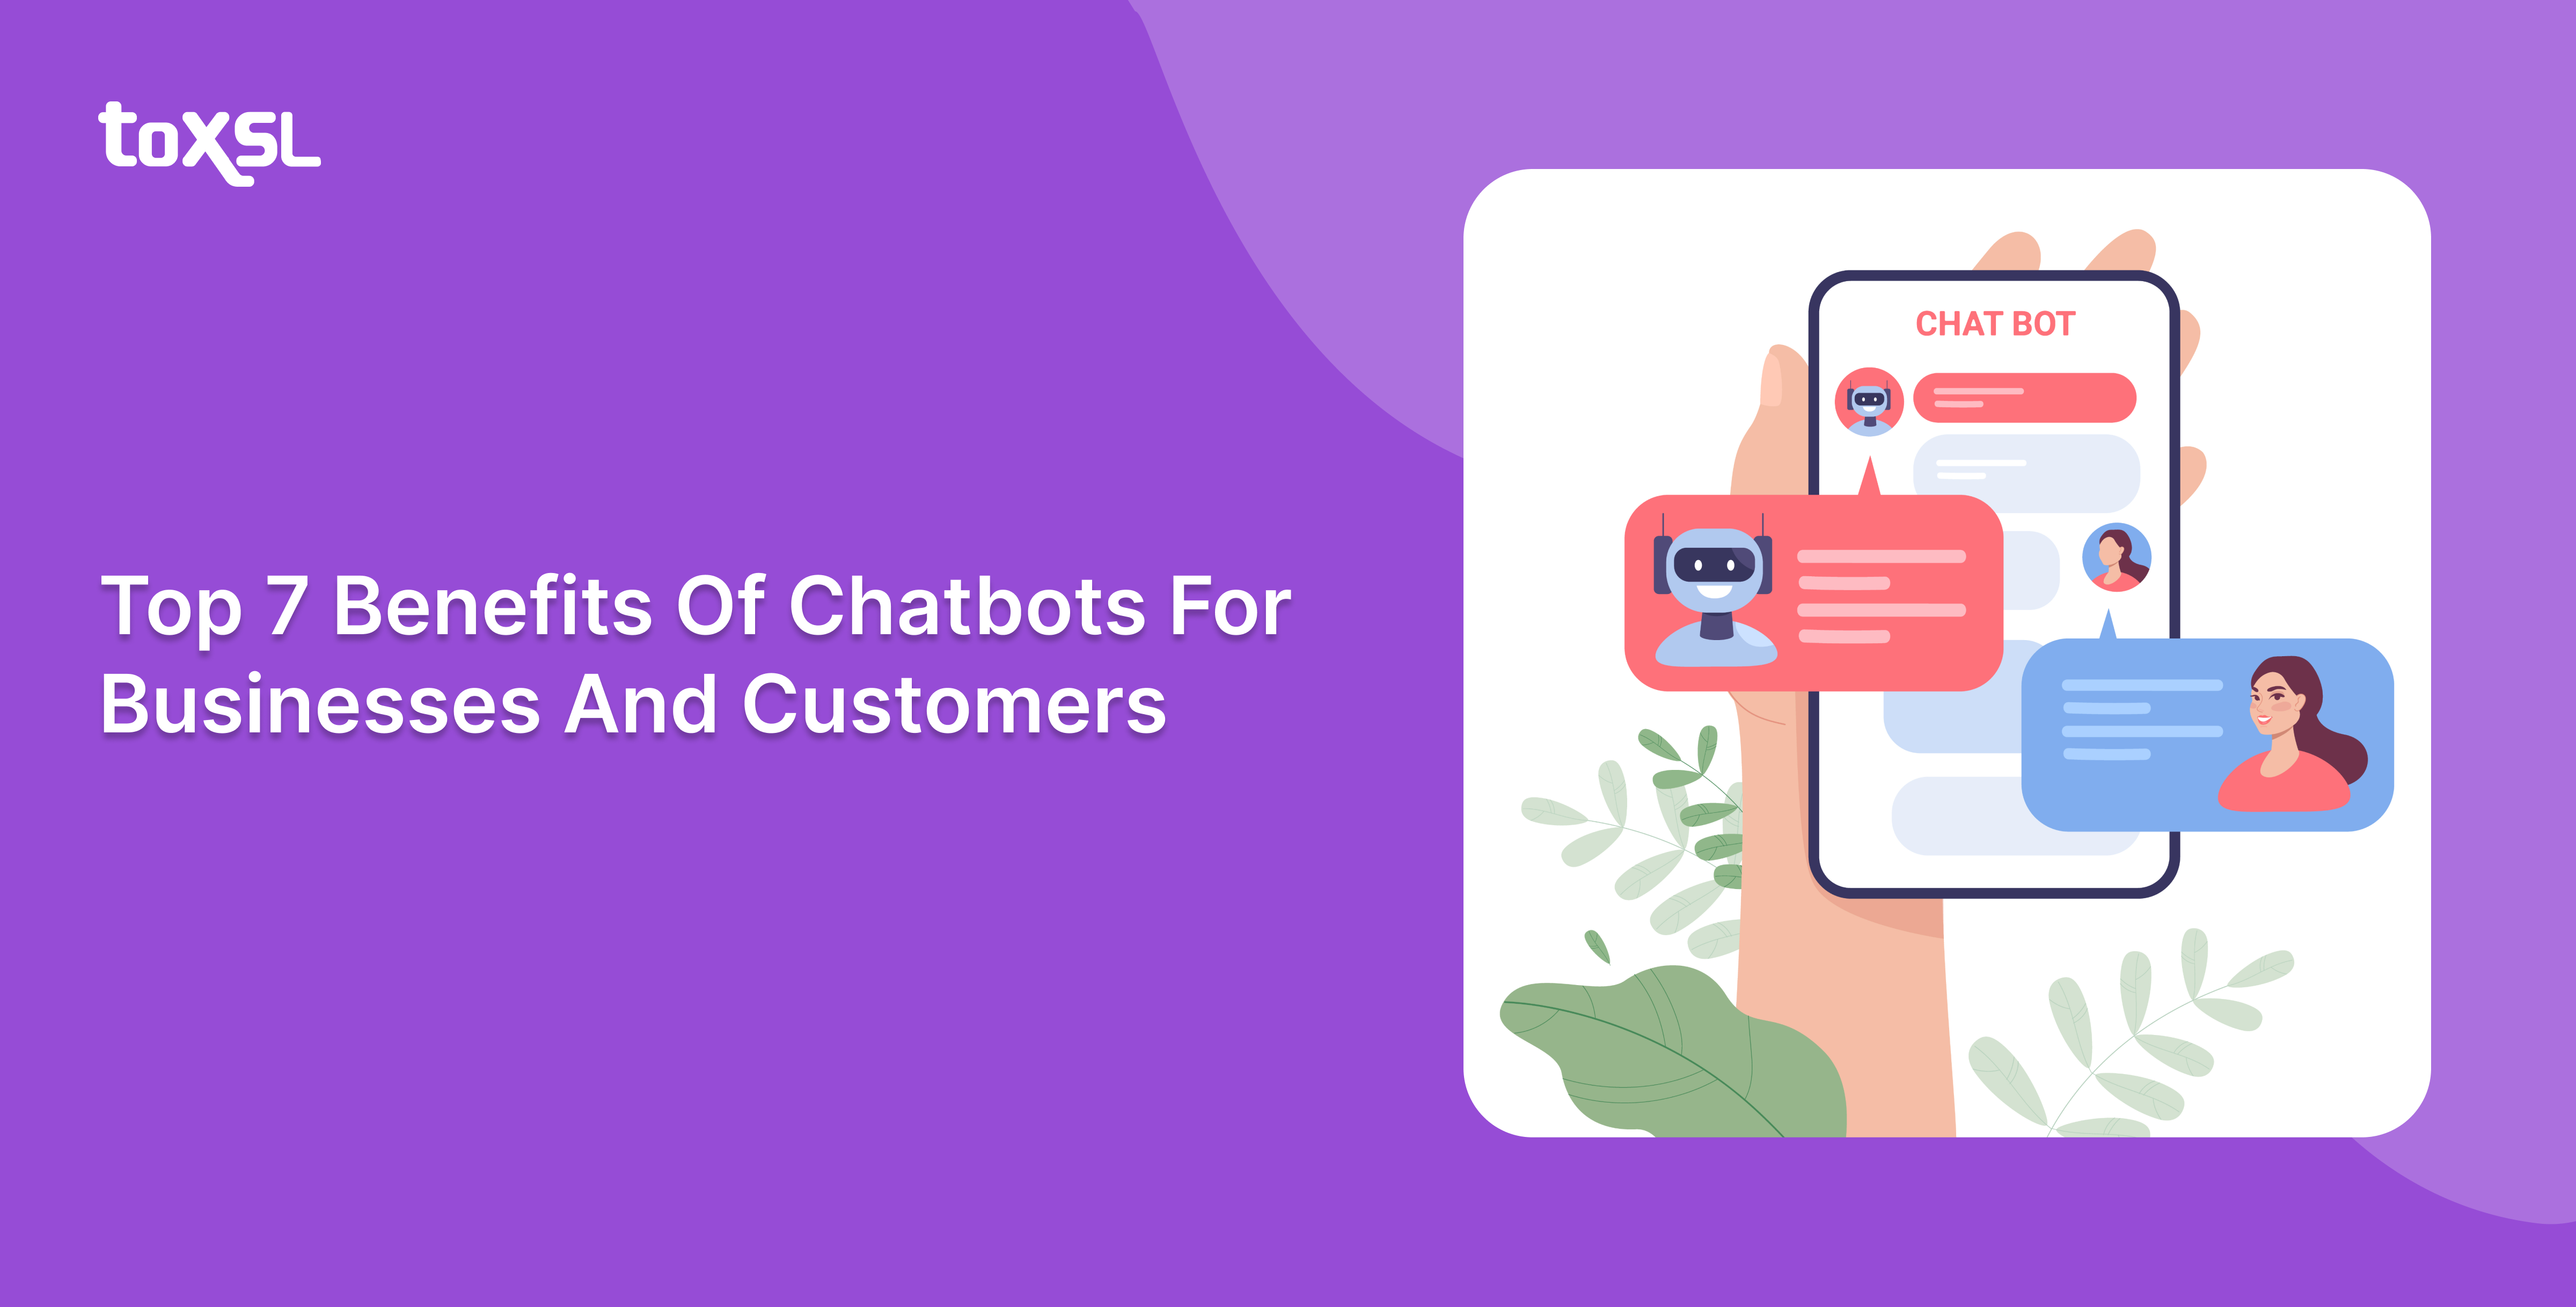 Top 7 Benefits Of Chatbot For Business And Customers